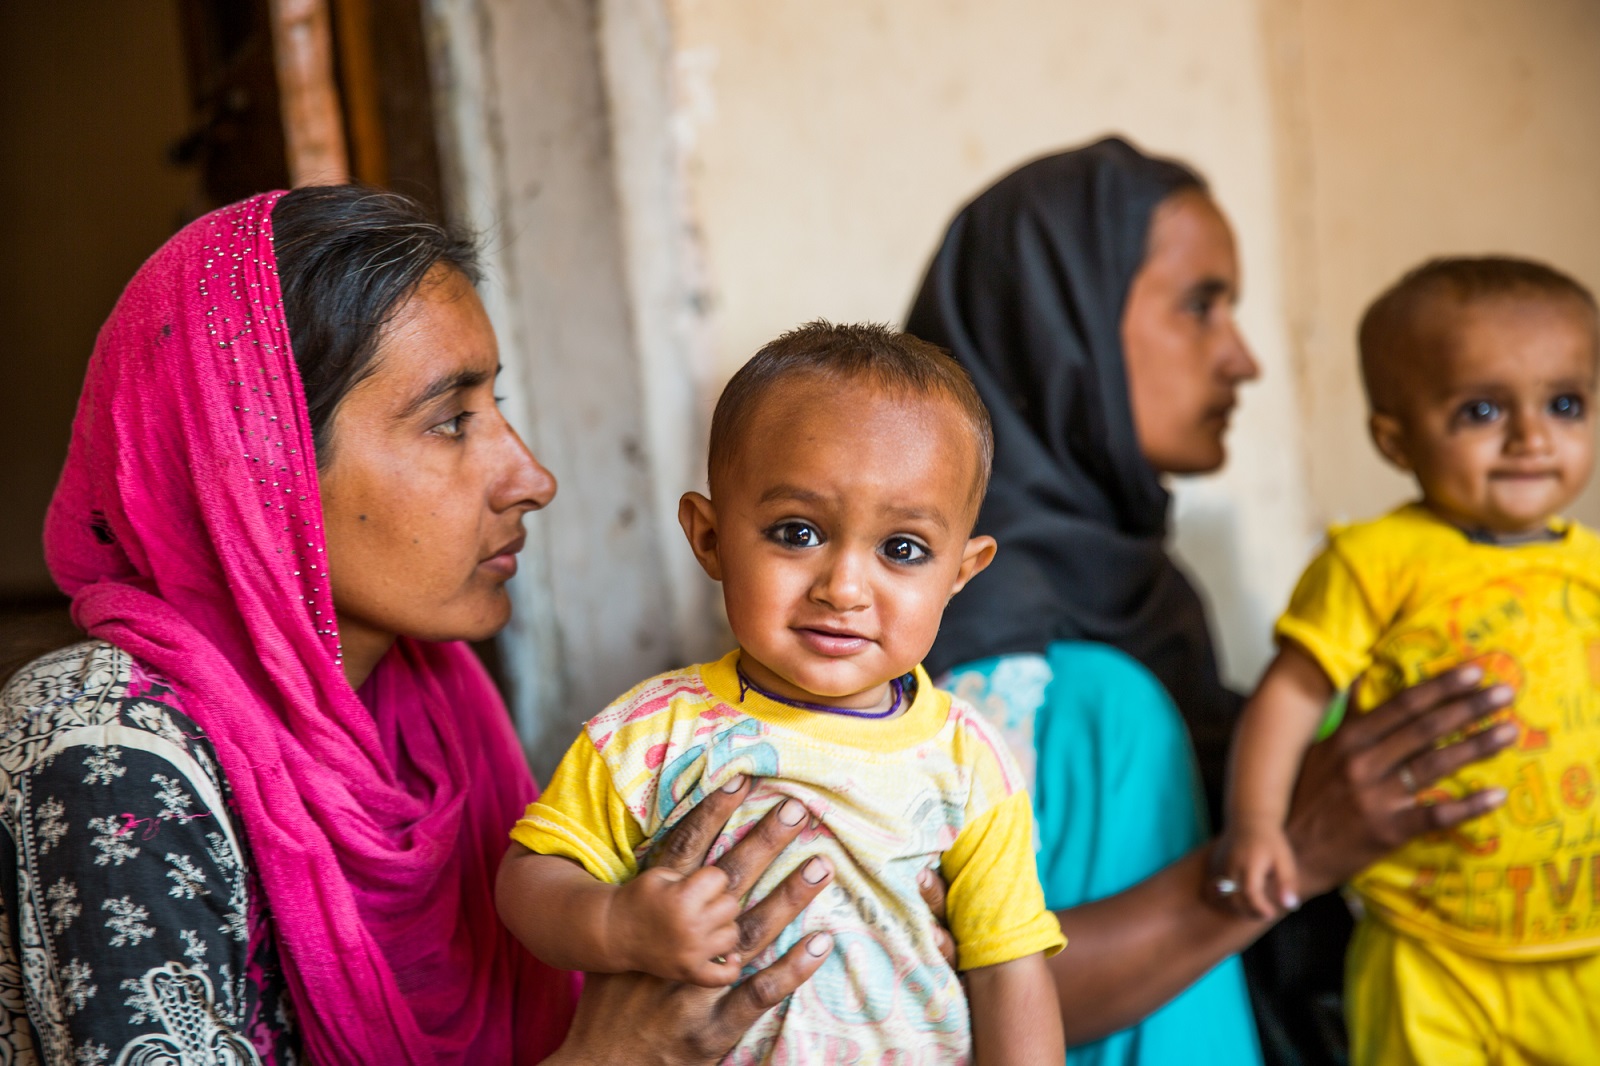  Iram (right) with her son Tanveer (8 month old) and Shehzadi with her son Shehzan (9 month old) attending Nutrition session in Porath village, Matiari district, Sindh province, Pakistan.